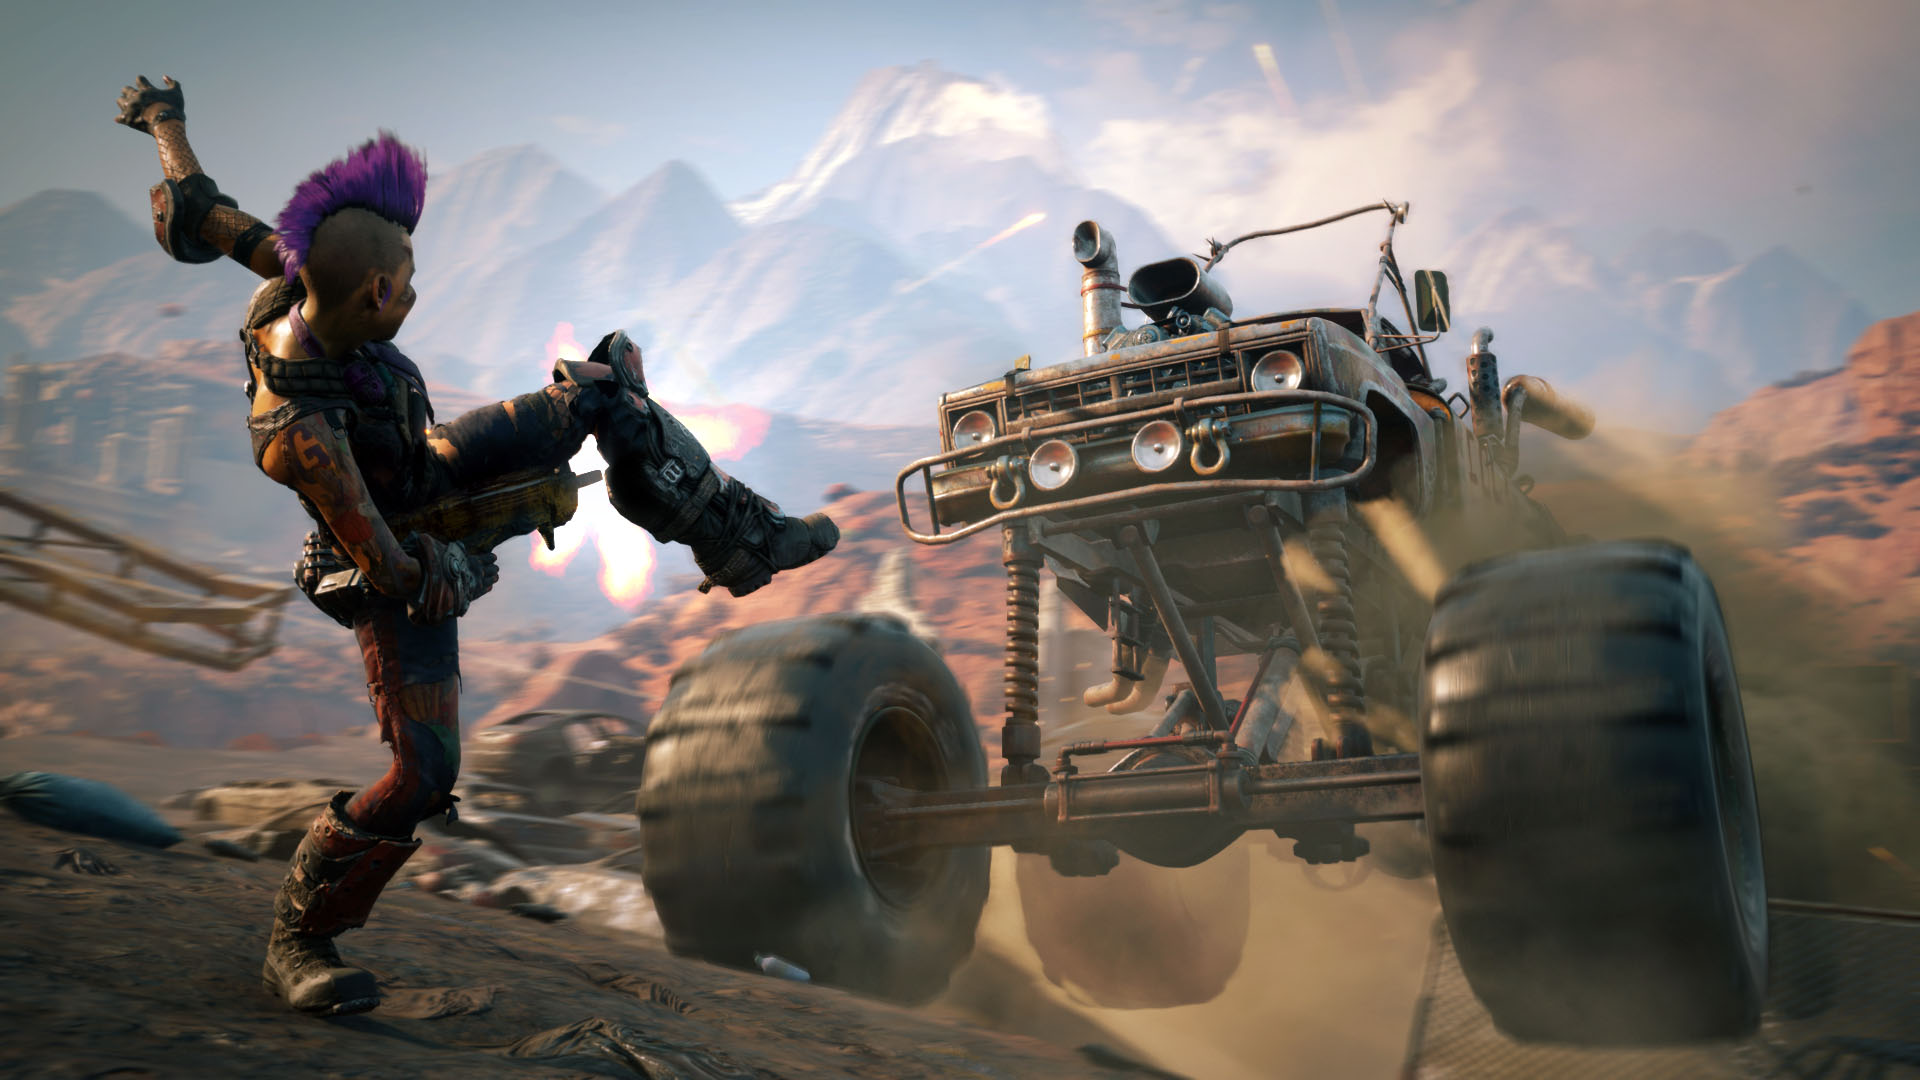 Rage 2 review: "Fluid combat but the open world isn't worth investing your into" | GamesRadar+